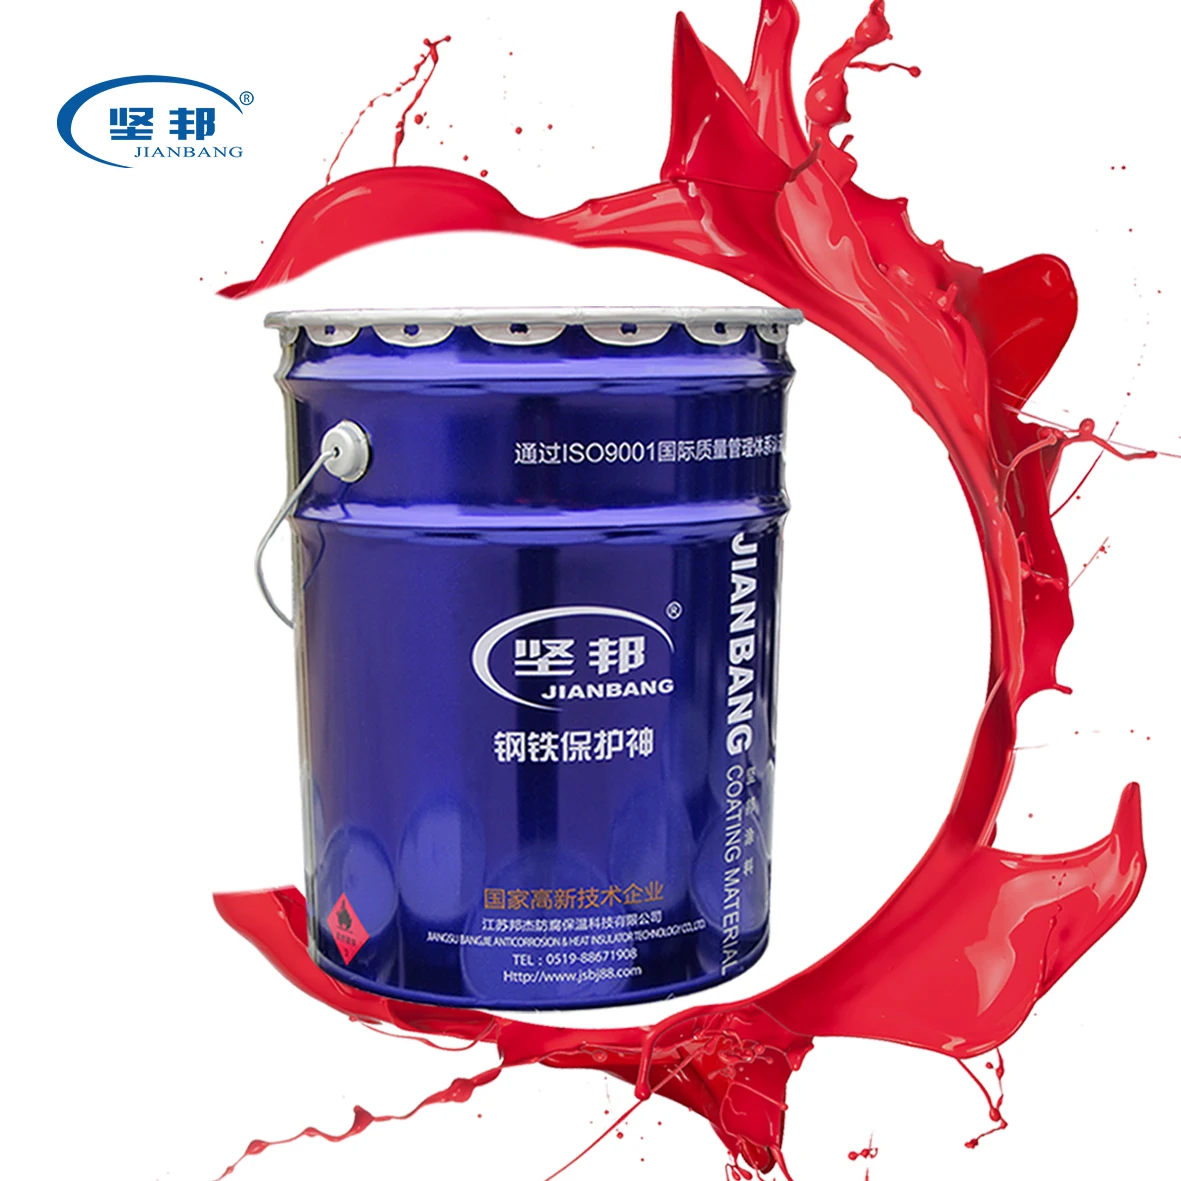 high quality professional acrylic paint prices for Metallic paint (62462551648)